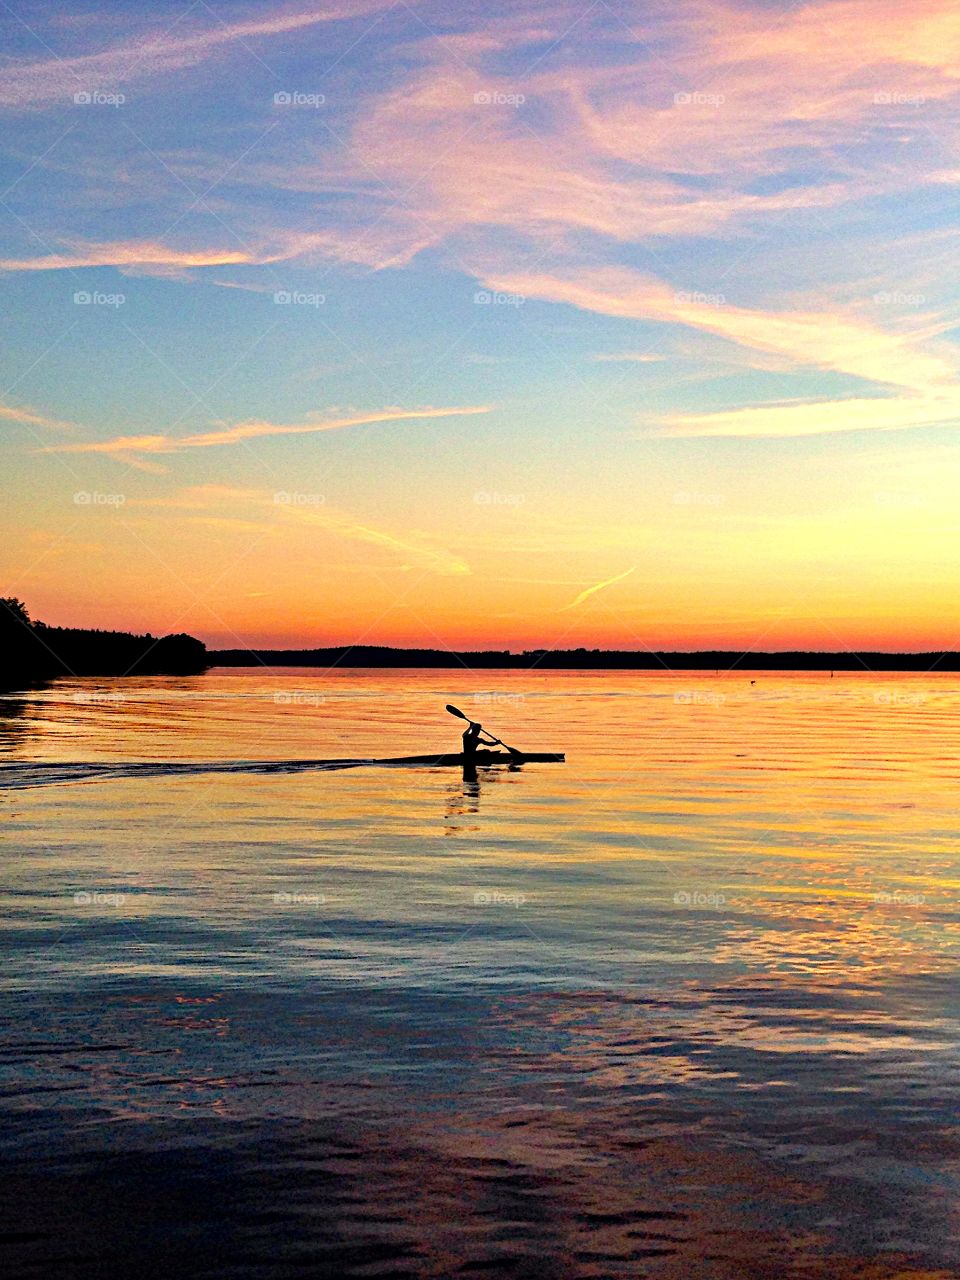 Canoeing in the sunset!